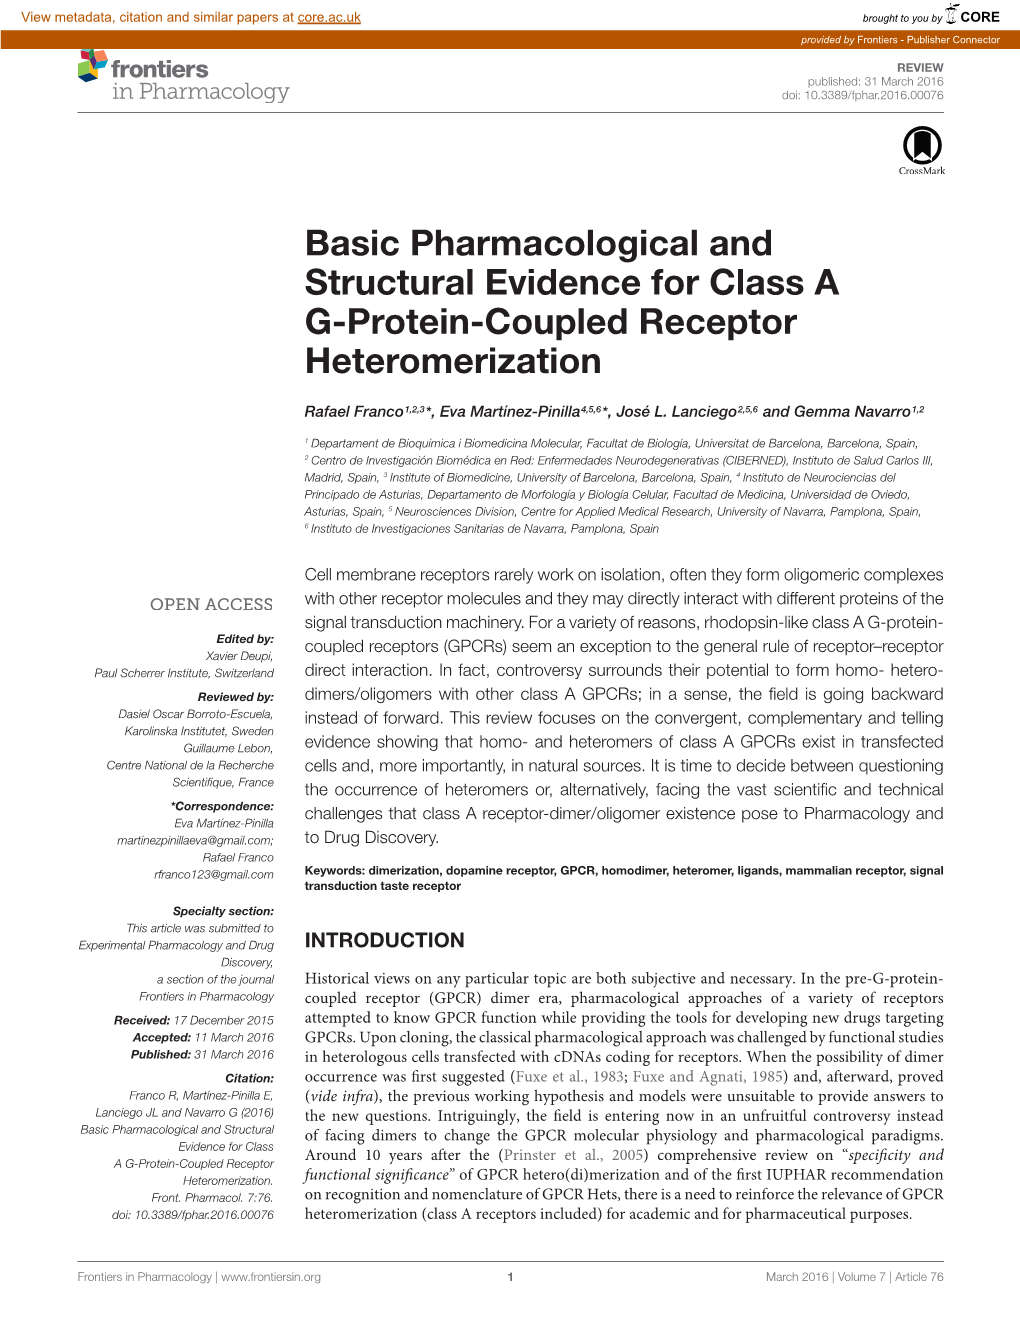 Basic Pharmacological and Structural Evidence for Class a G-Protein-Coupled Receptor Heteromerization